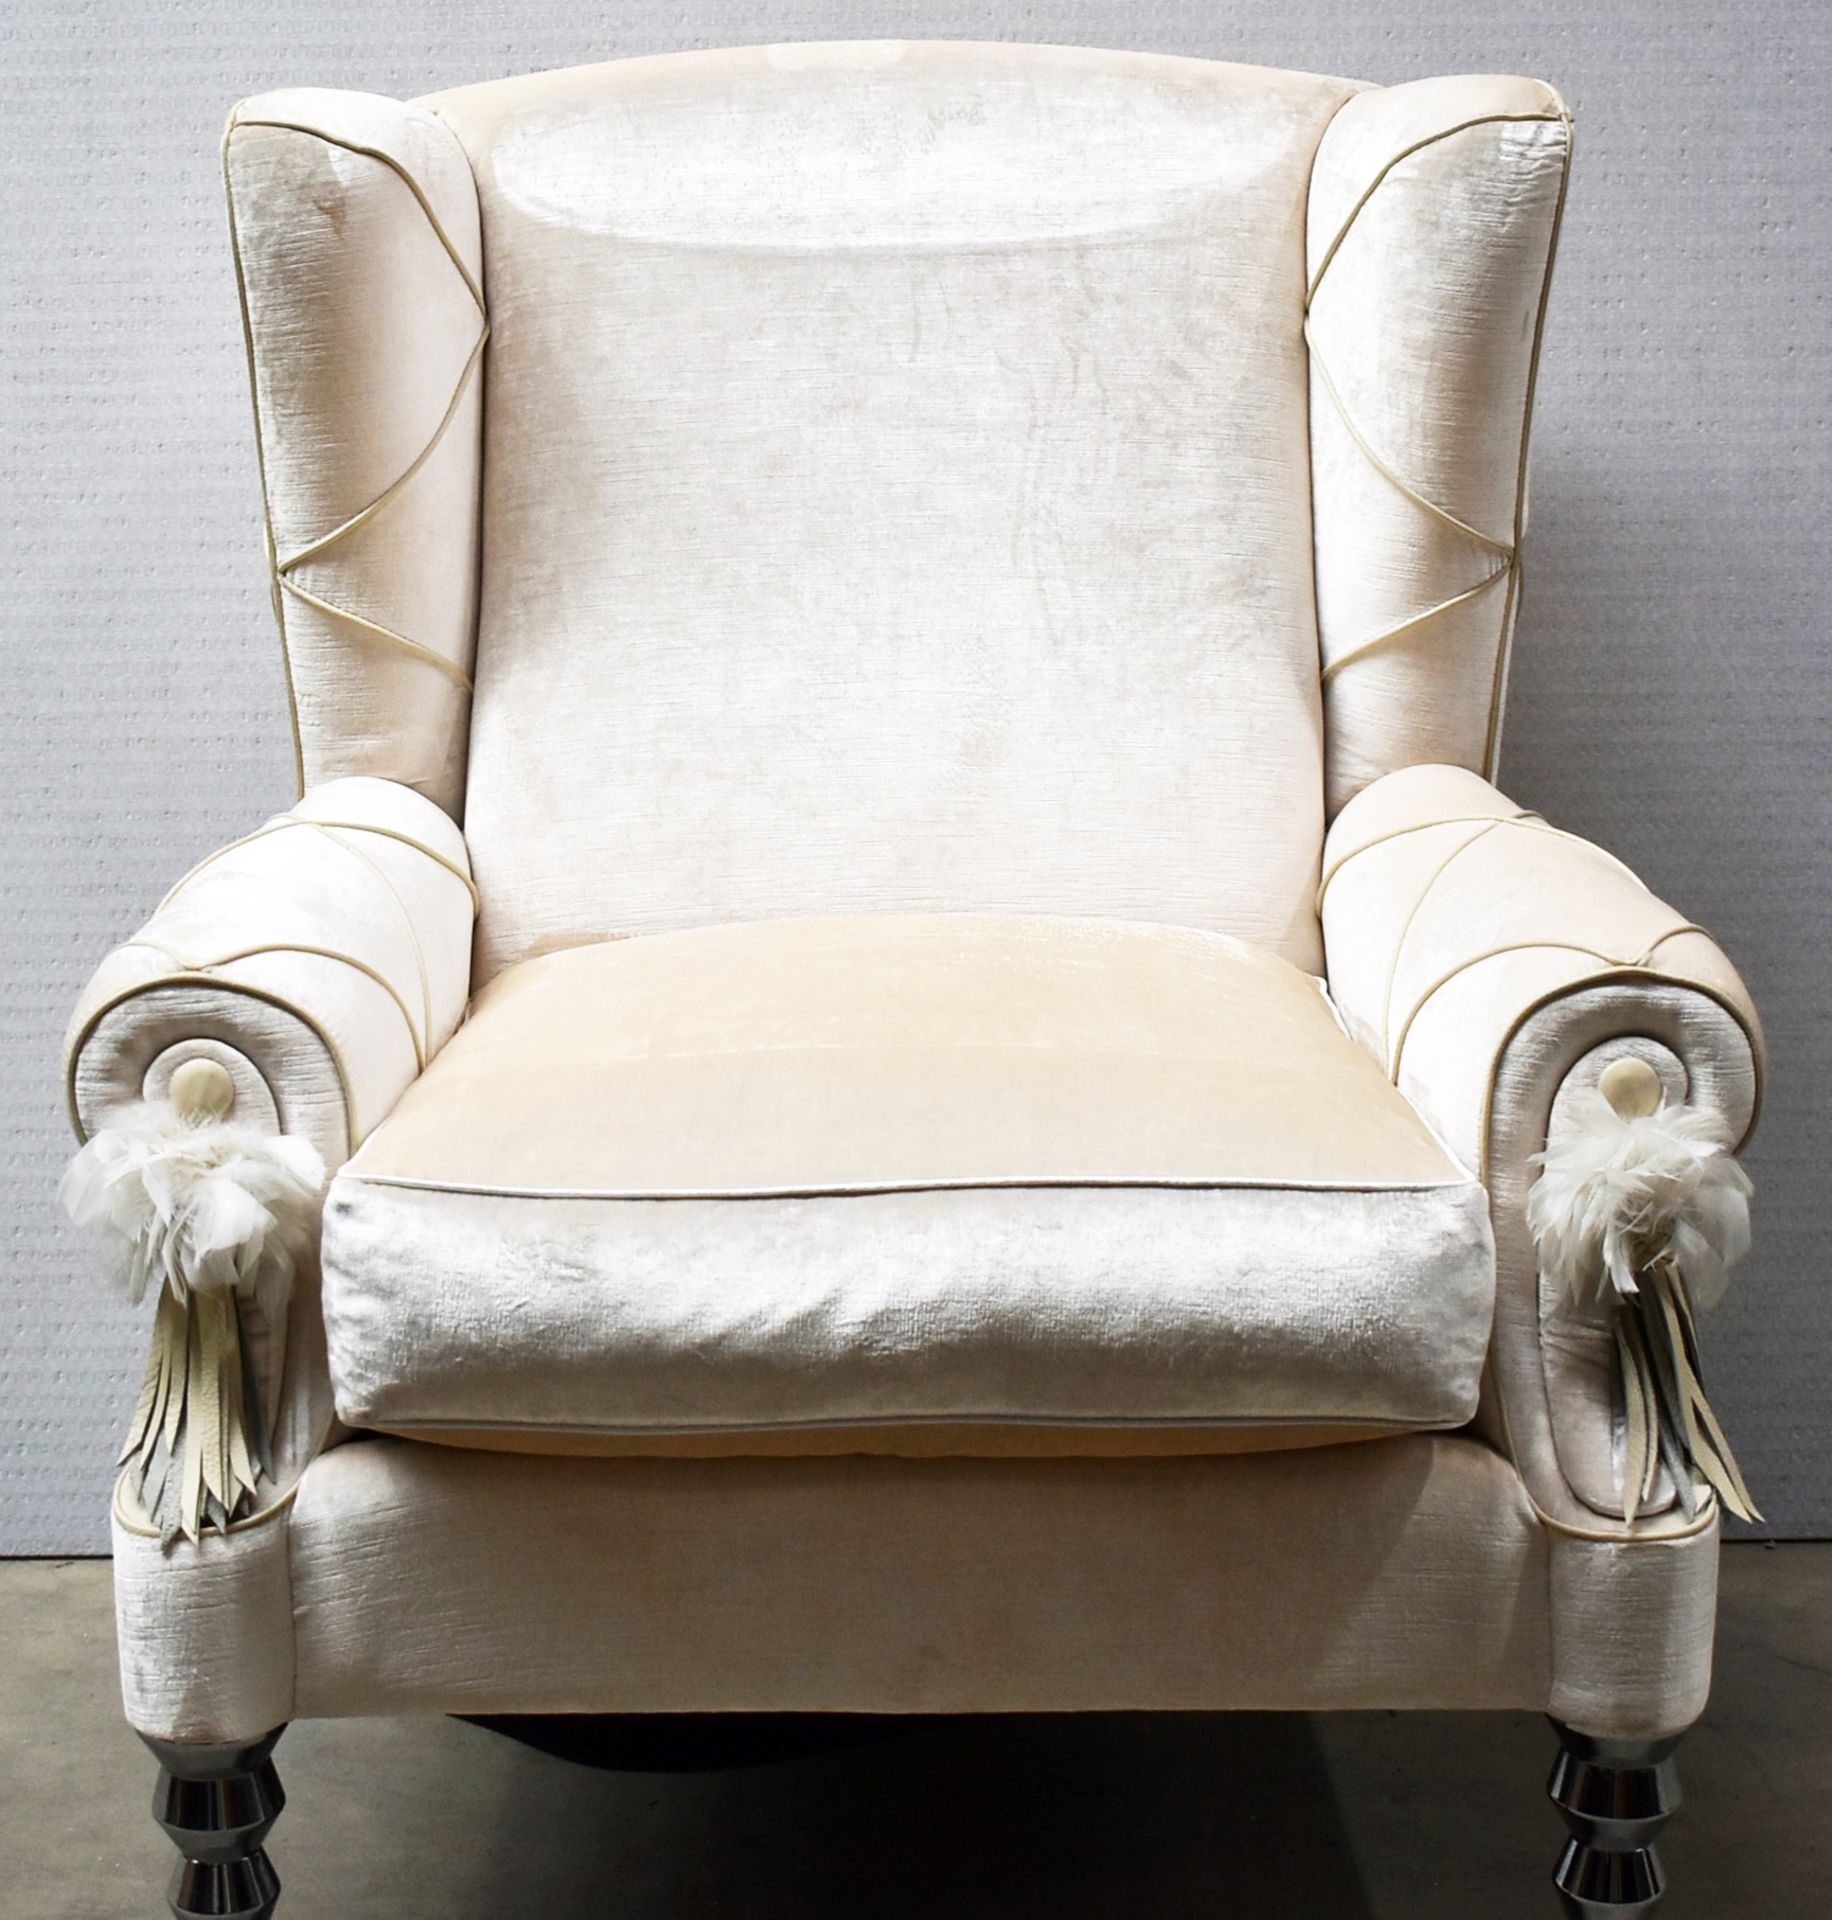 Set Of 2 x Bespoke Fireside Wingback Cream Leather Armchair With Stitch Arms & Feather Detail - Image 9 of 14